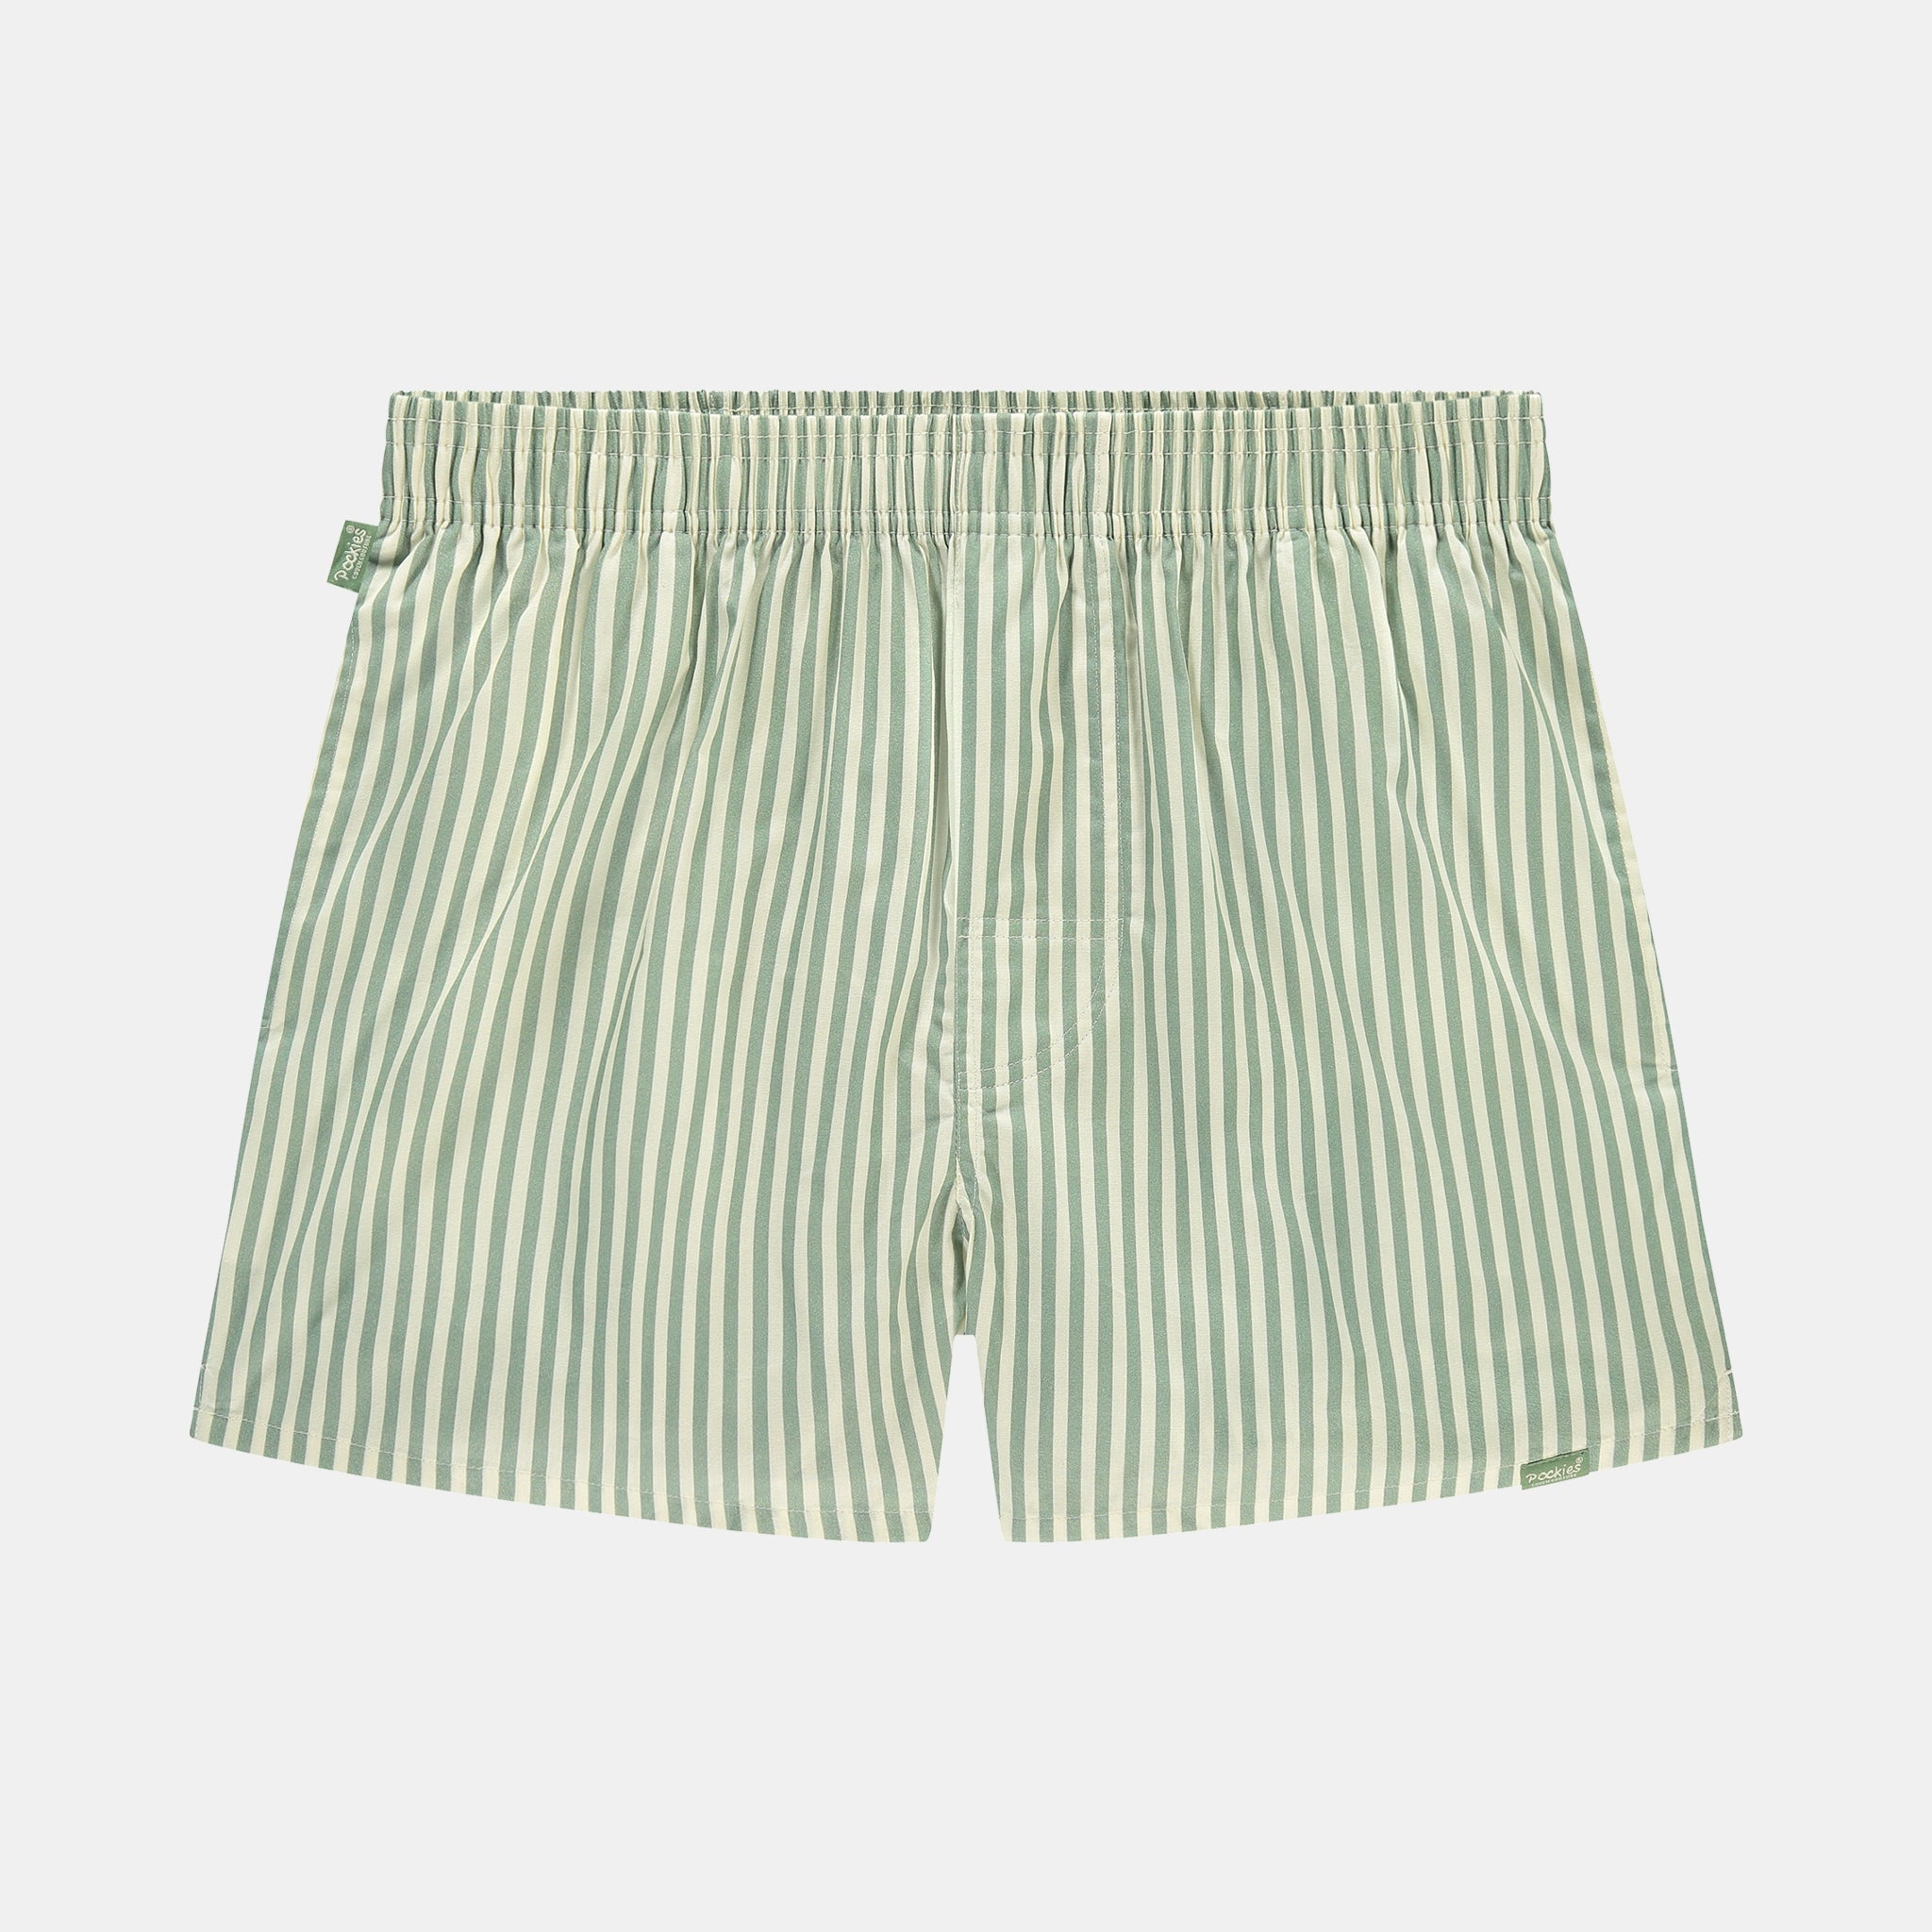 2-Pack - Striped Boxers